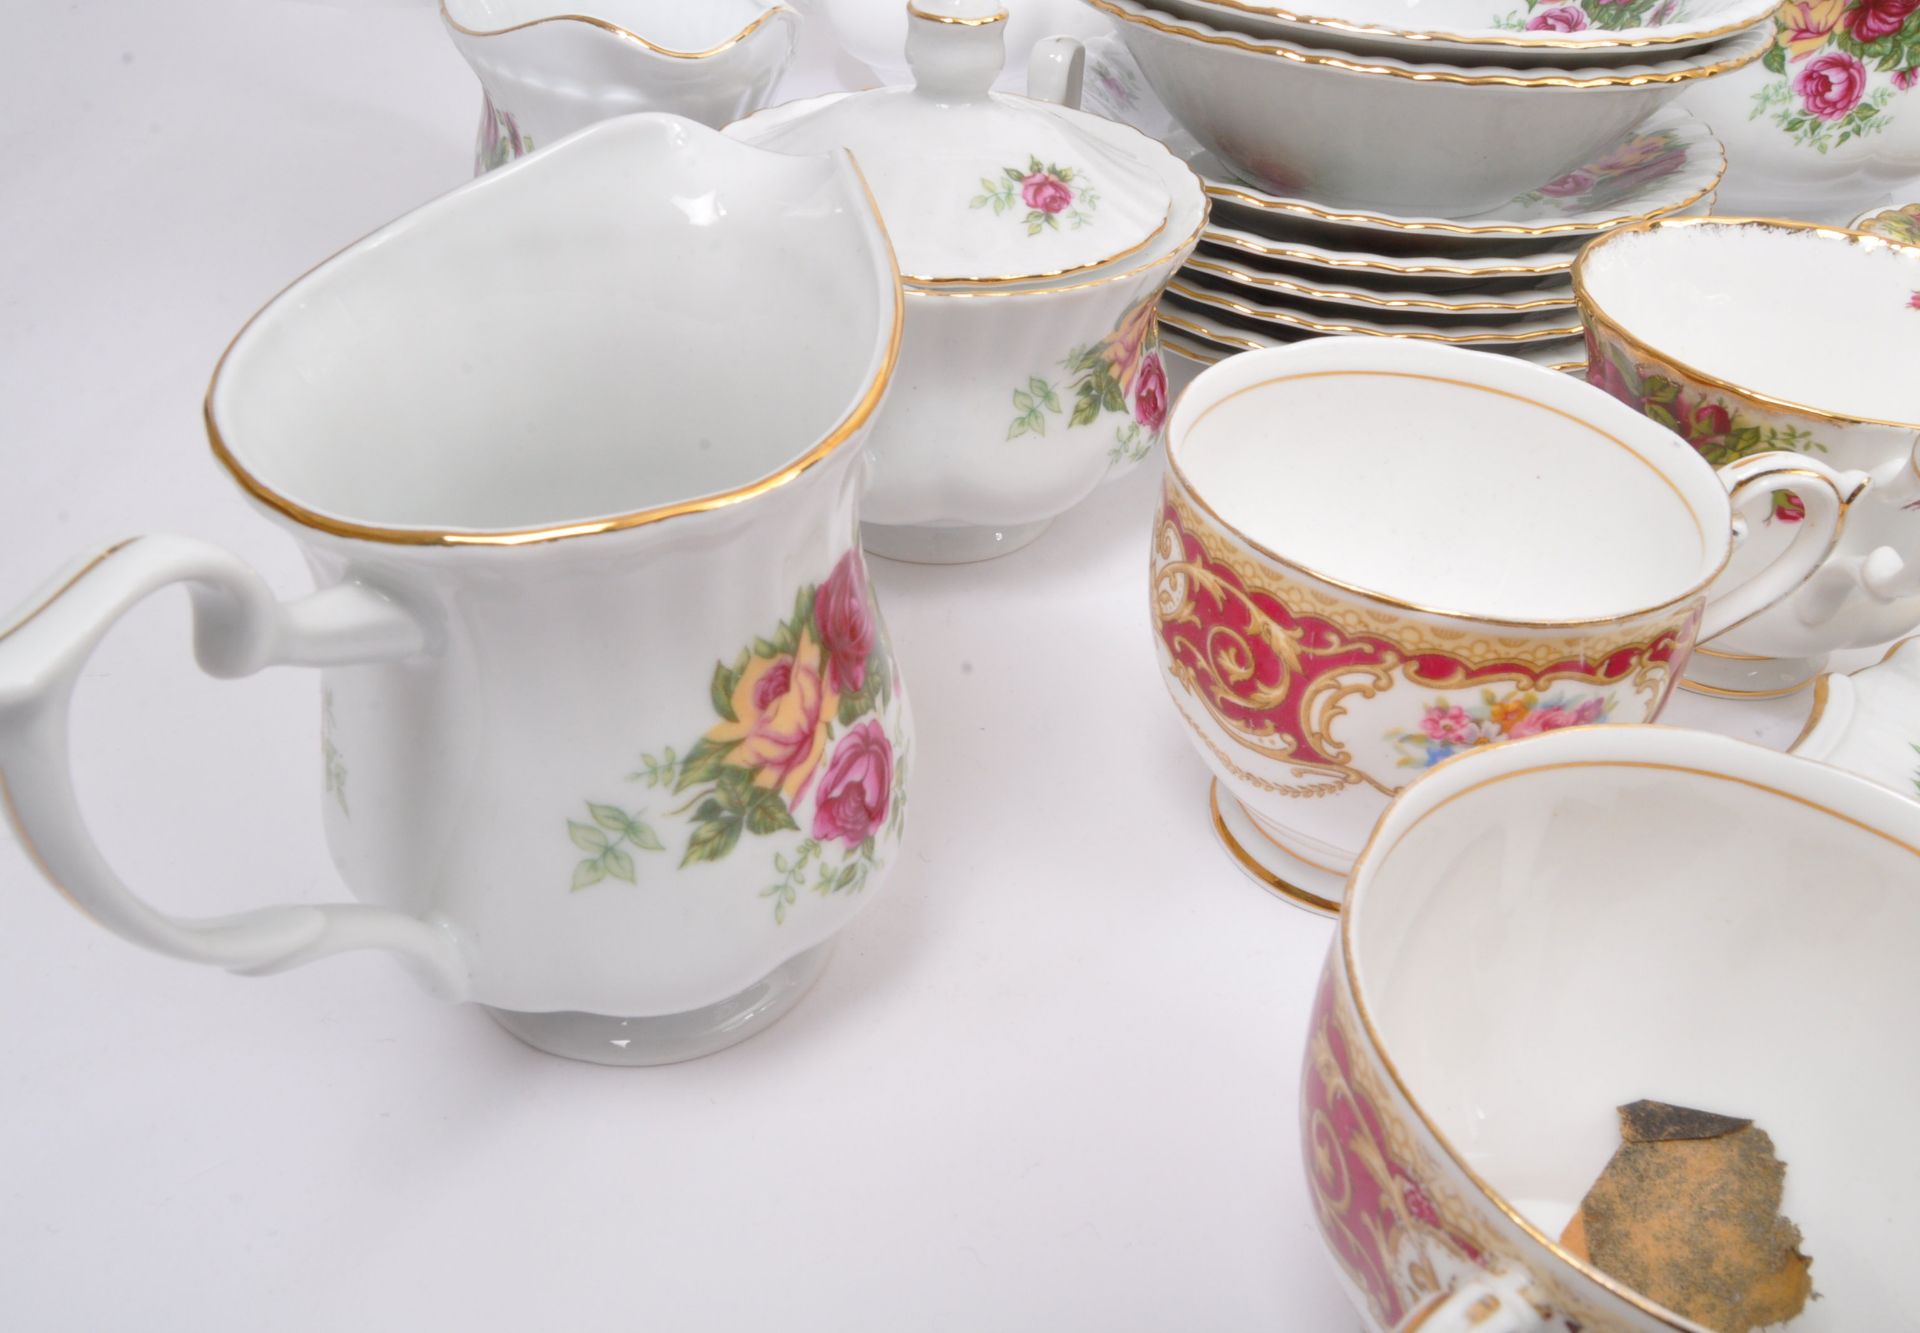 COLLECTION OF VINTAGE 20TH CENTURY FINE CHINA TEA SET - Image 3 of 5